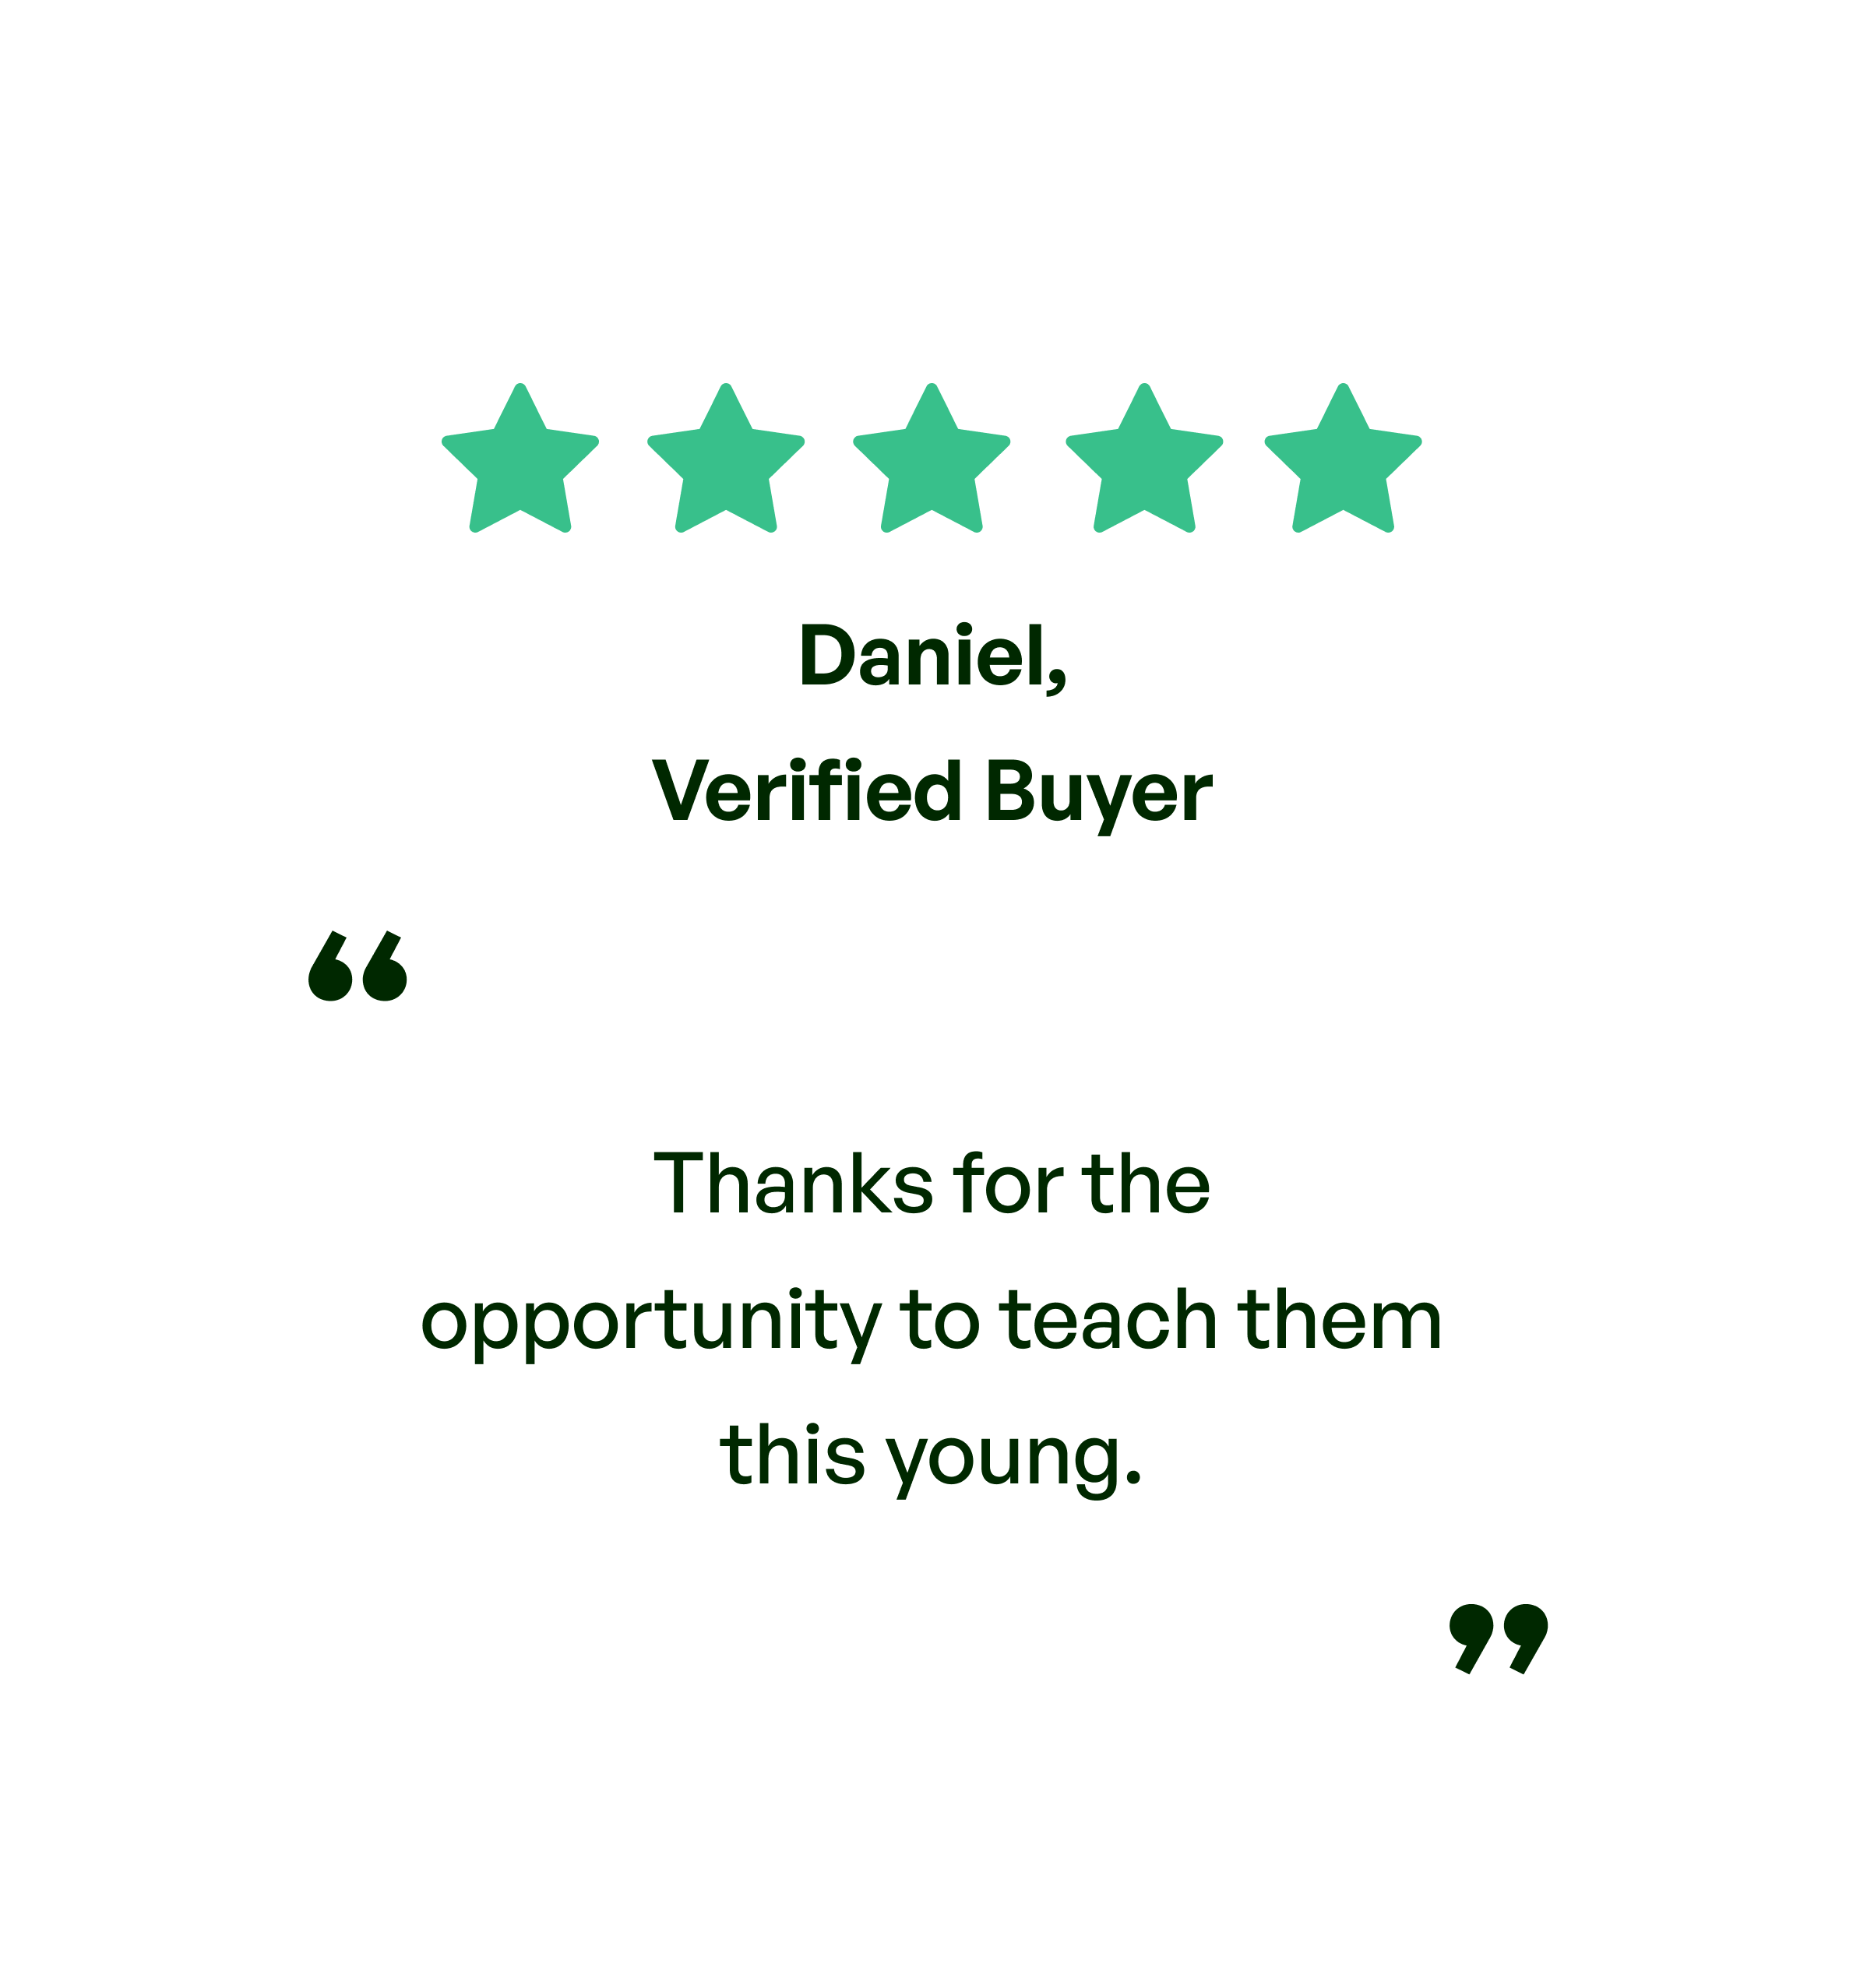 Five stars. Testimonial: Thanks for the opportunity to teach them this young.